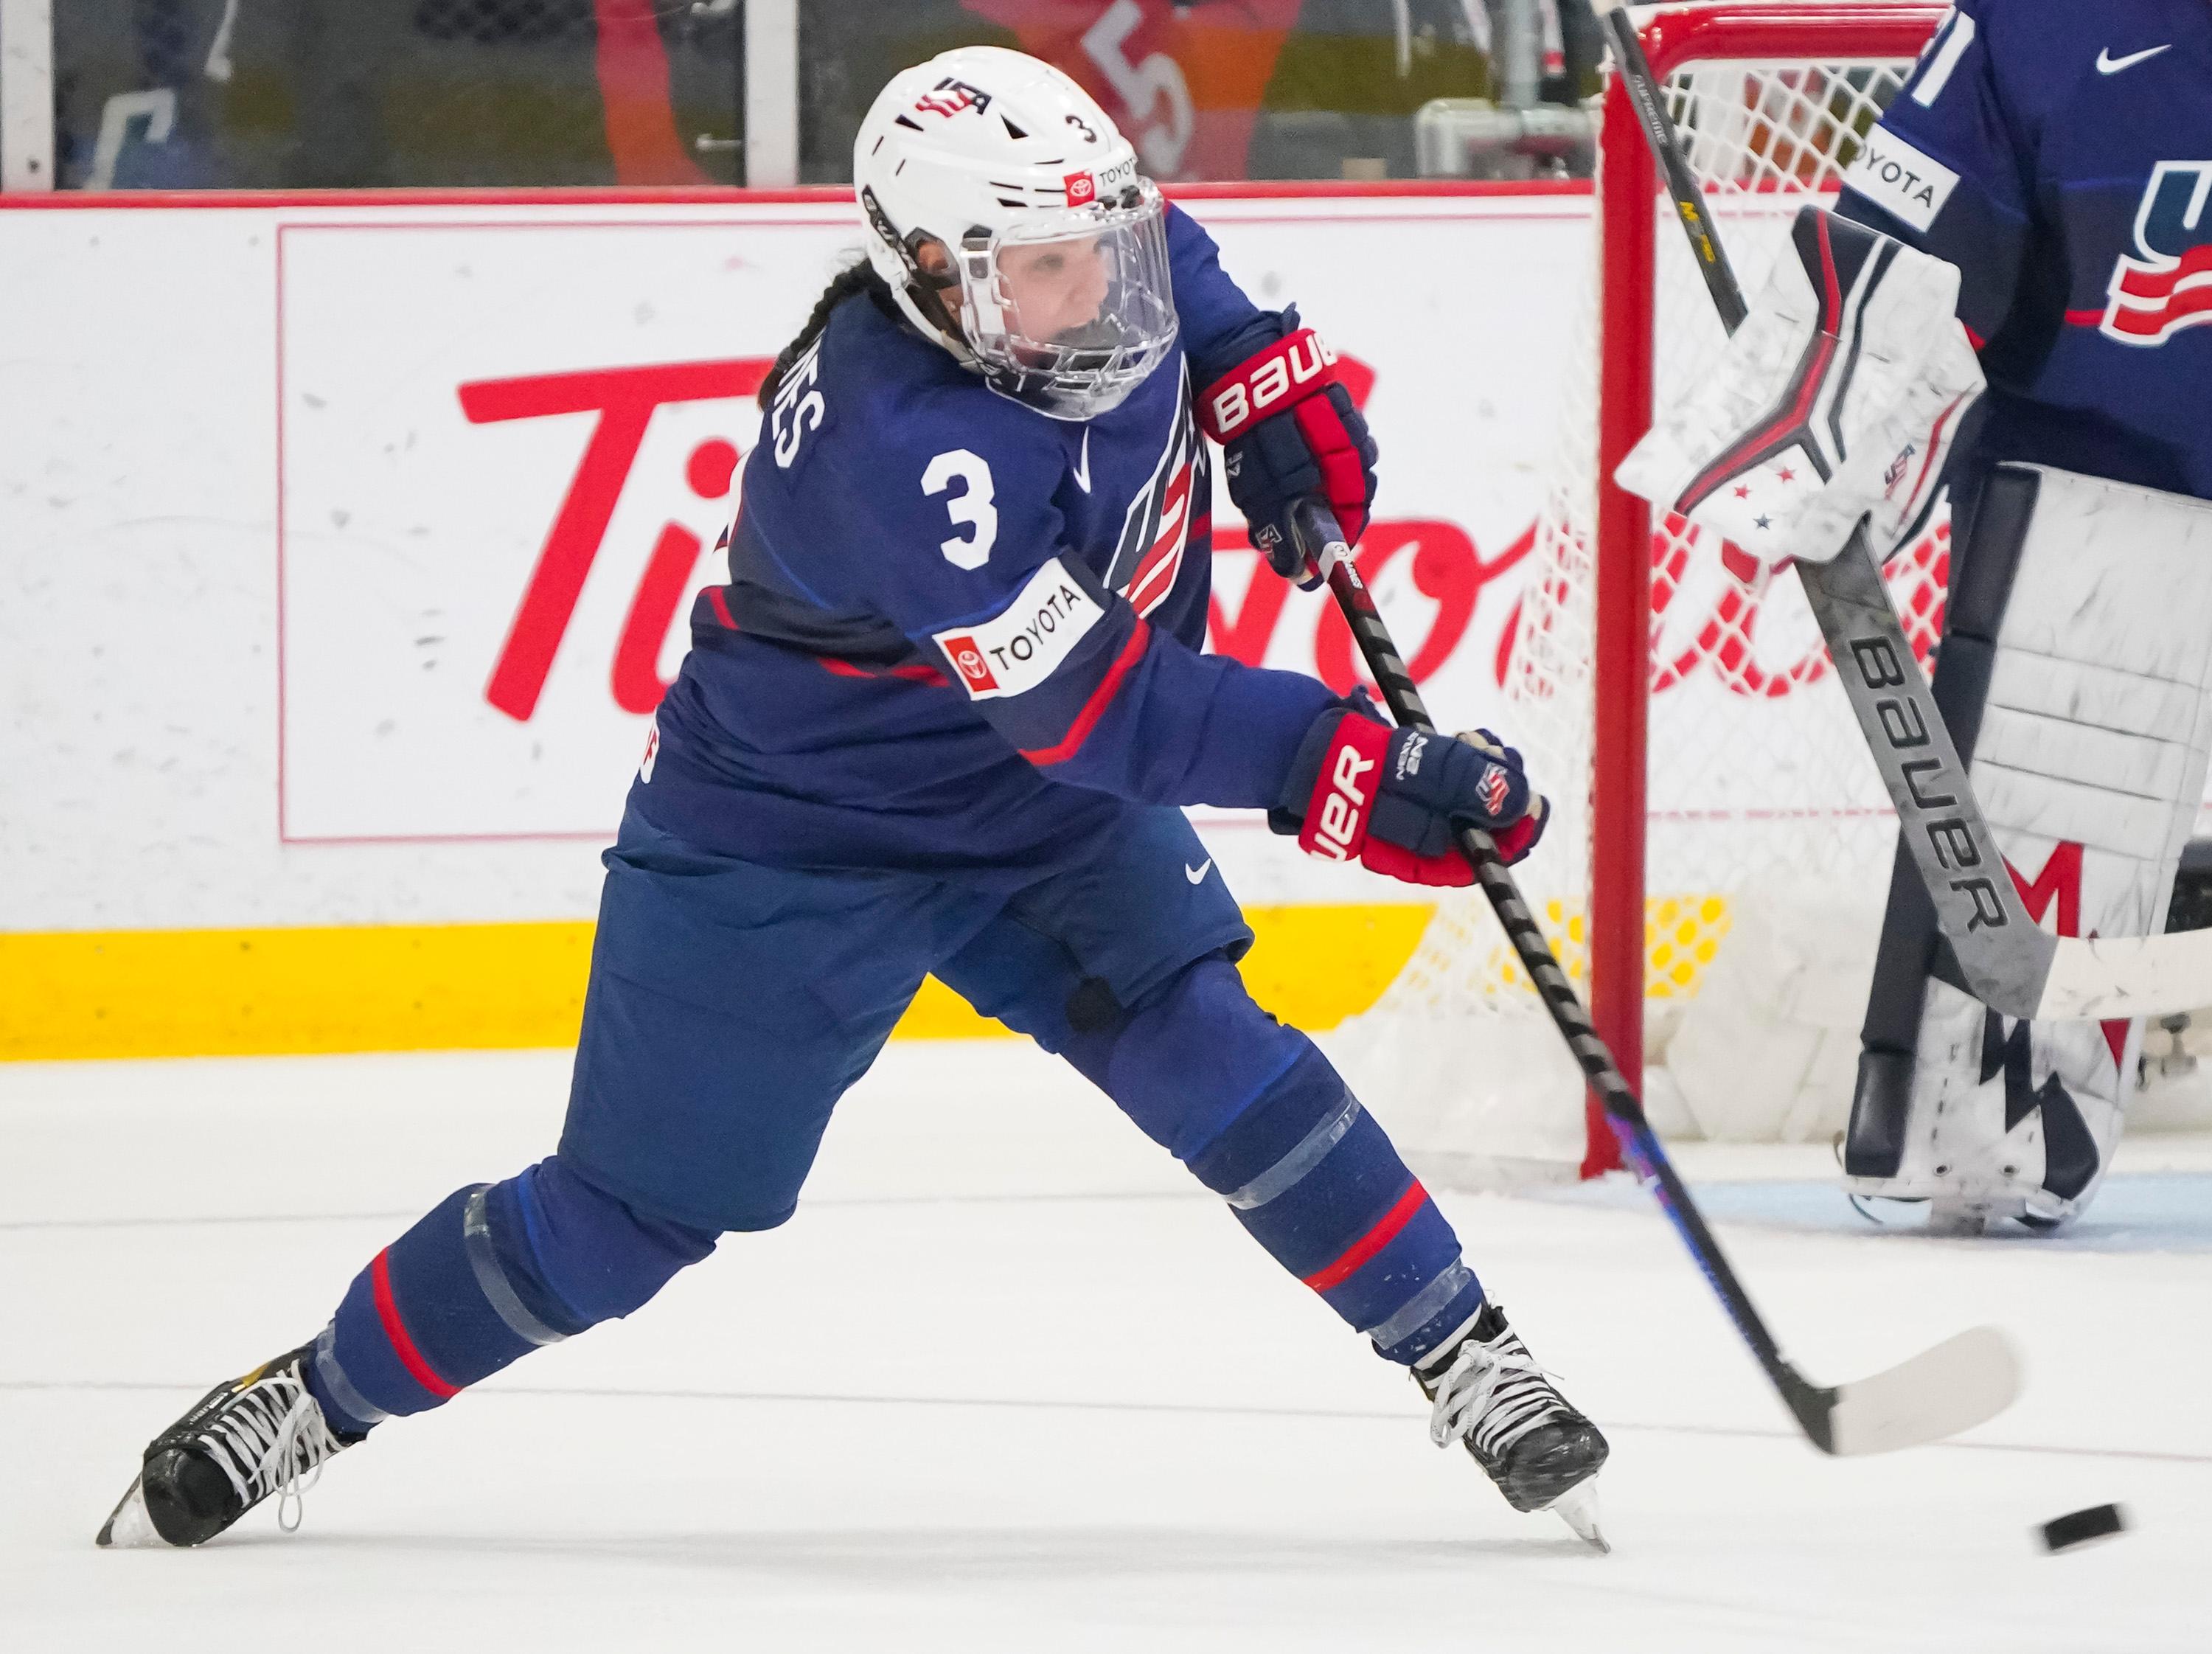 SoCal’s Barnes Aims to Inspire Next Generation With U.S. Women’s Hockey Team